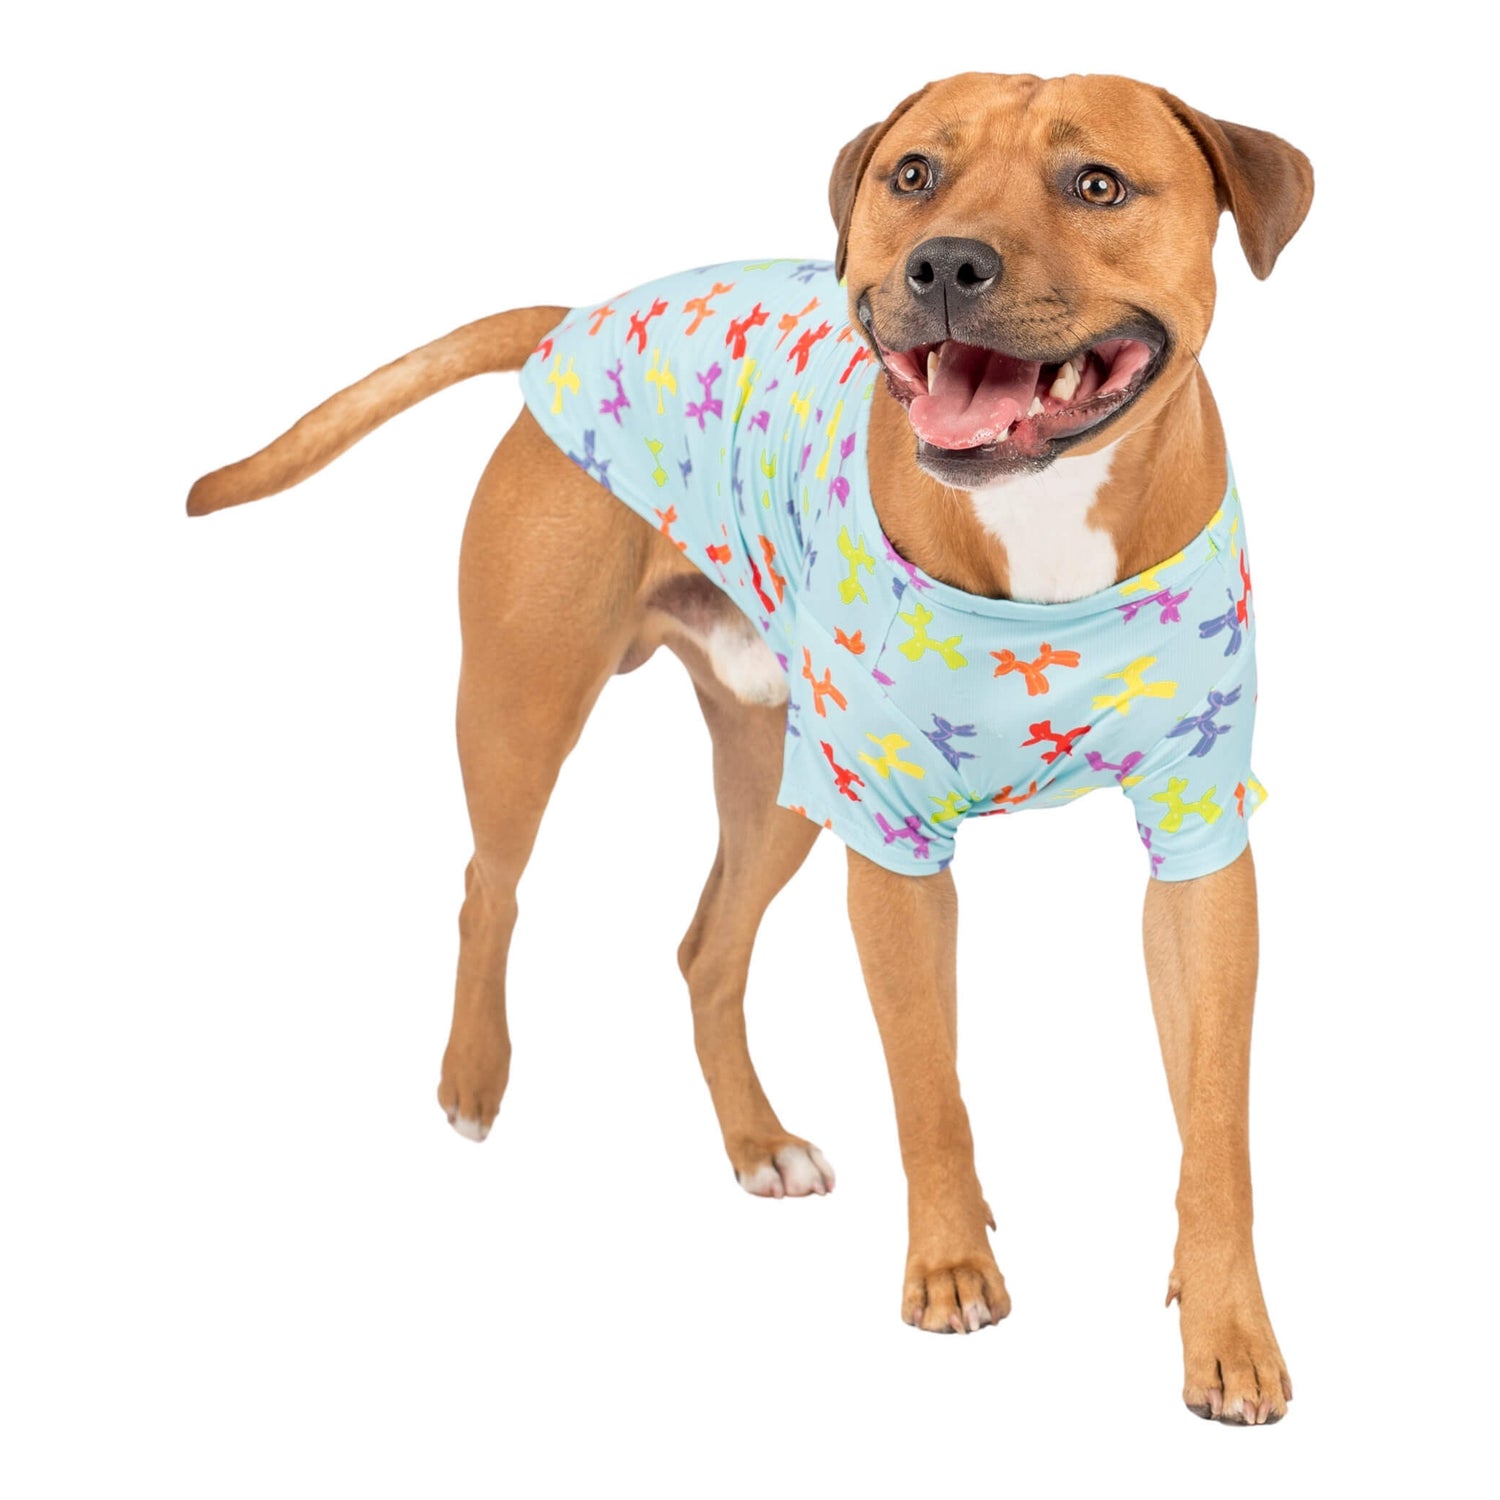 A Staffy standing while wearing Vibrant Hounds Balloon dog cooling shirt. It is blue with balloon dog shapes printed on it.